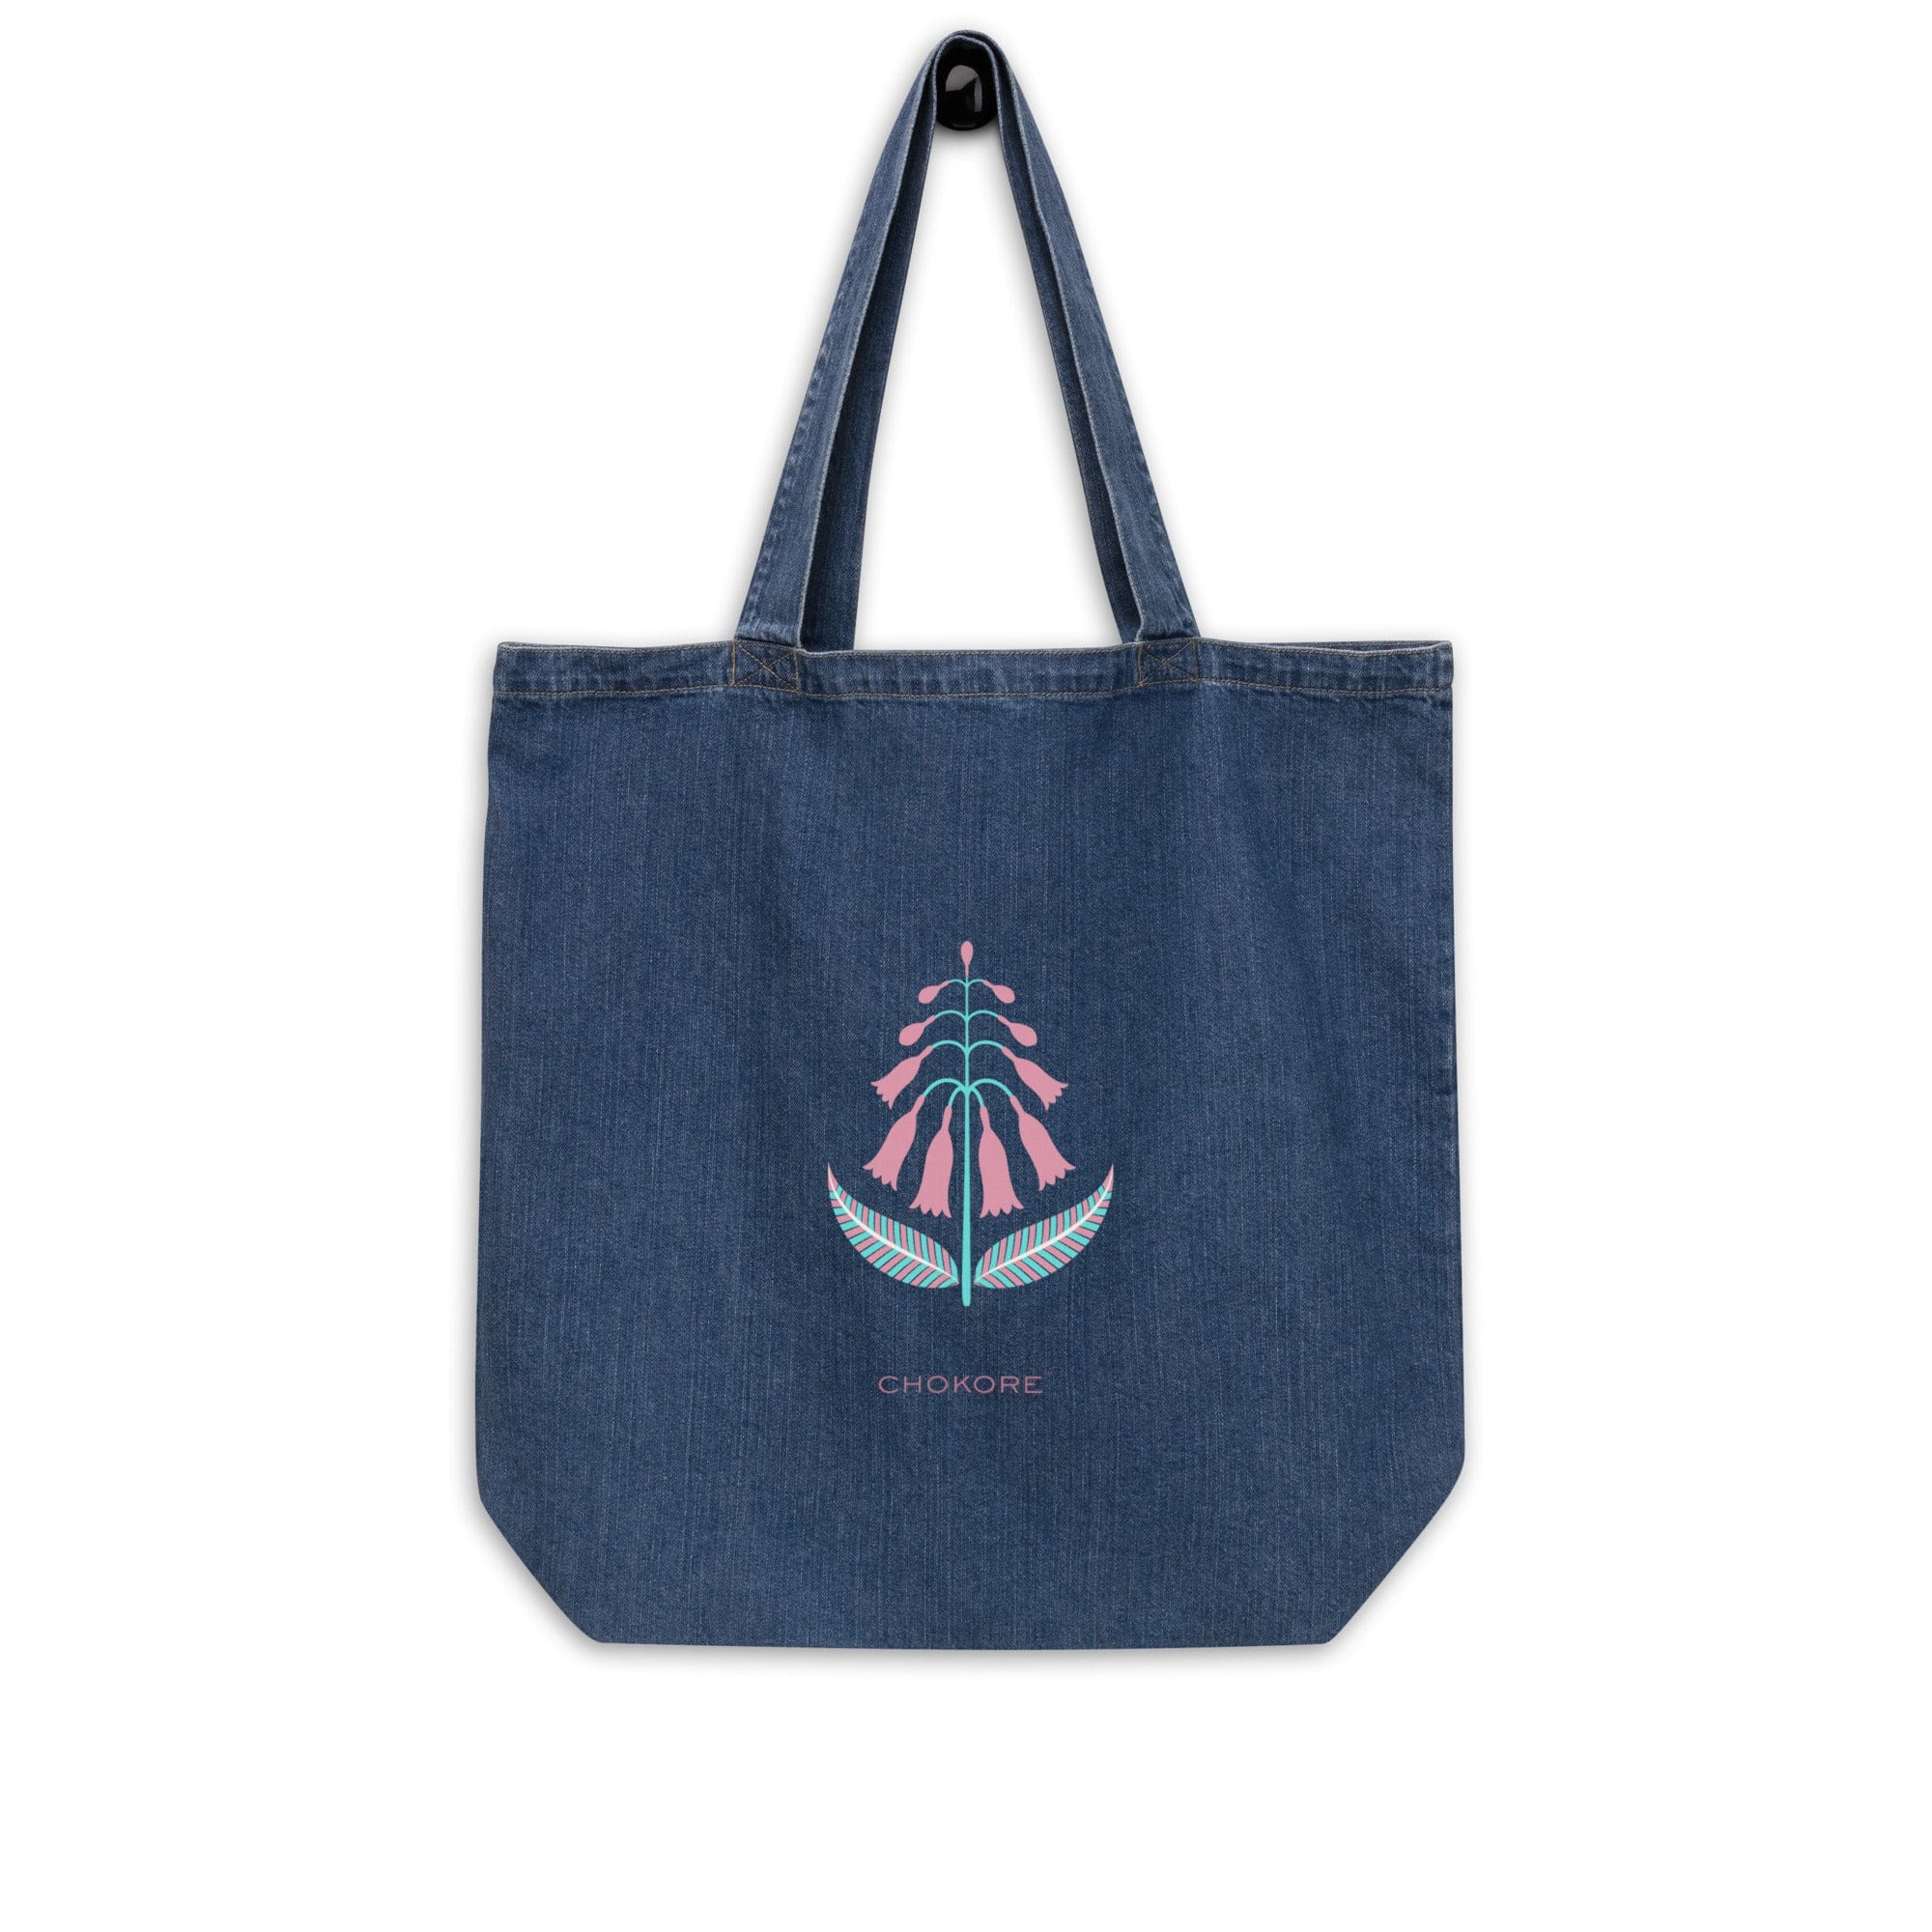 Organic Denim Tote Bag with Floral Art. From the Indian at Heart collection.